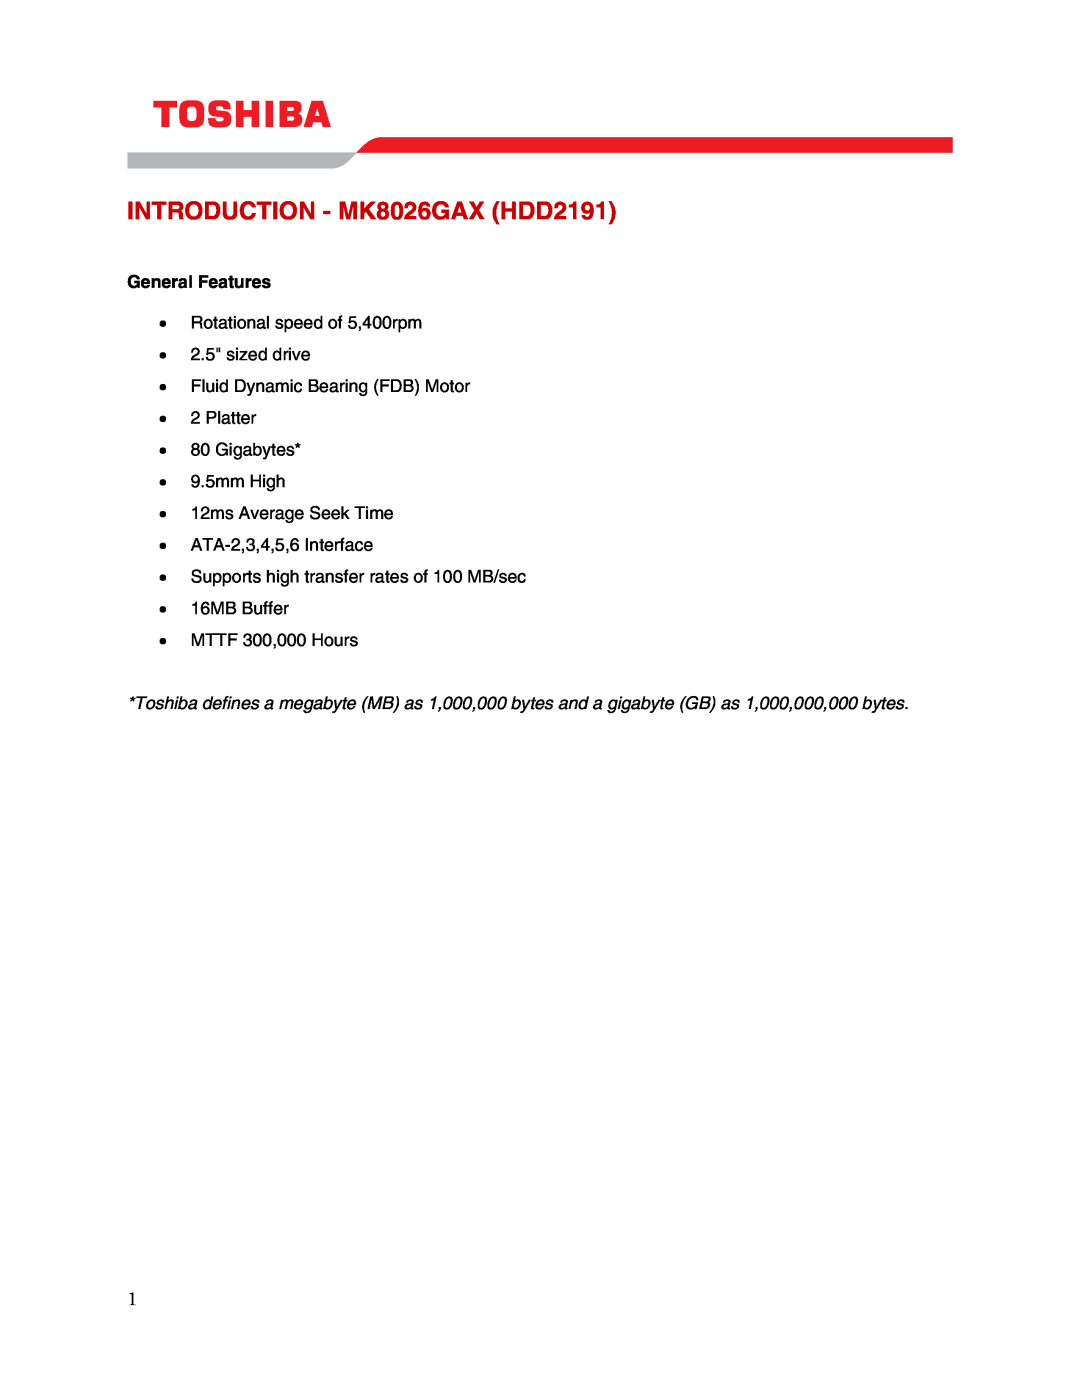 Toshiba user manual INTRODUCTION - MK8026GAX HDD2191, General Features 